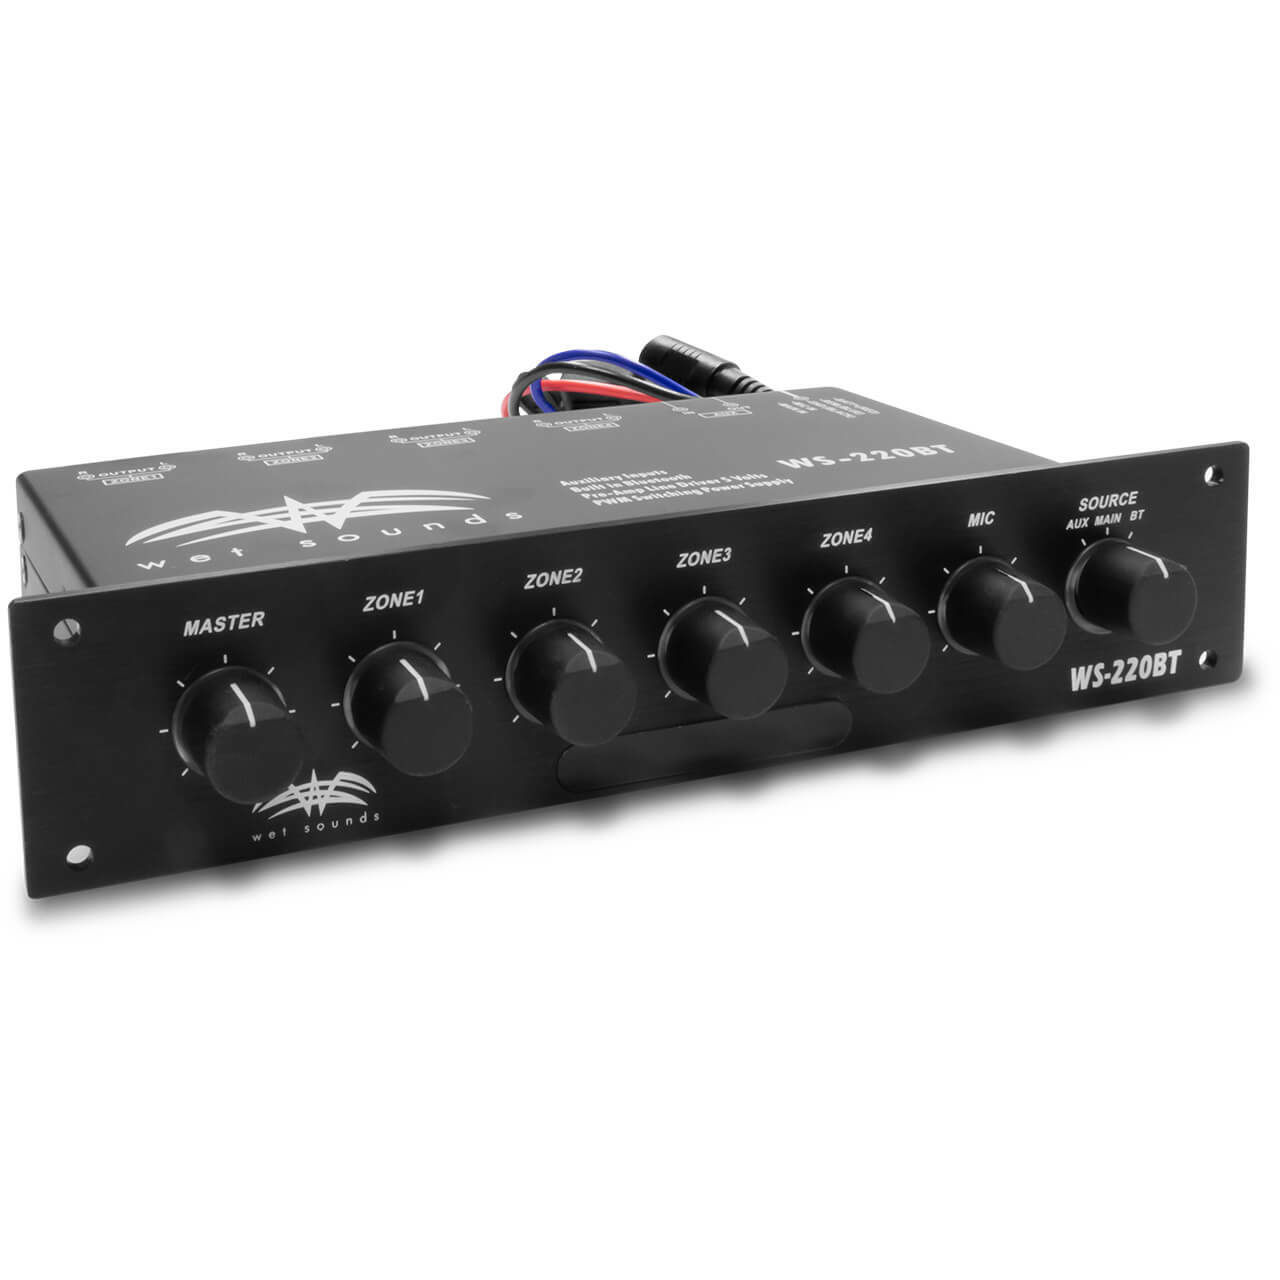 WS-220 BT* Bluetooth Enabled 4 Zone Control and built in Mic